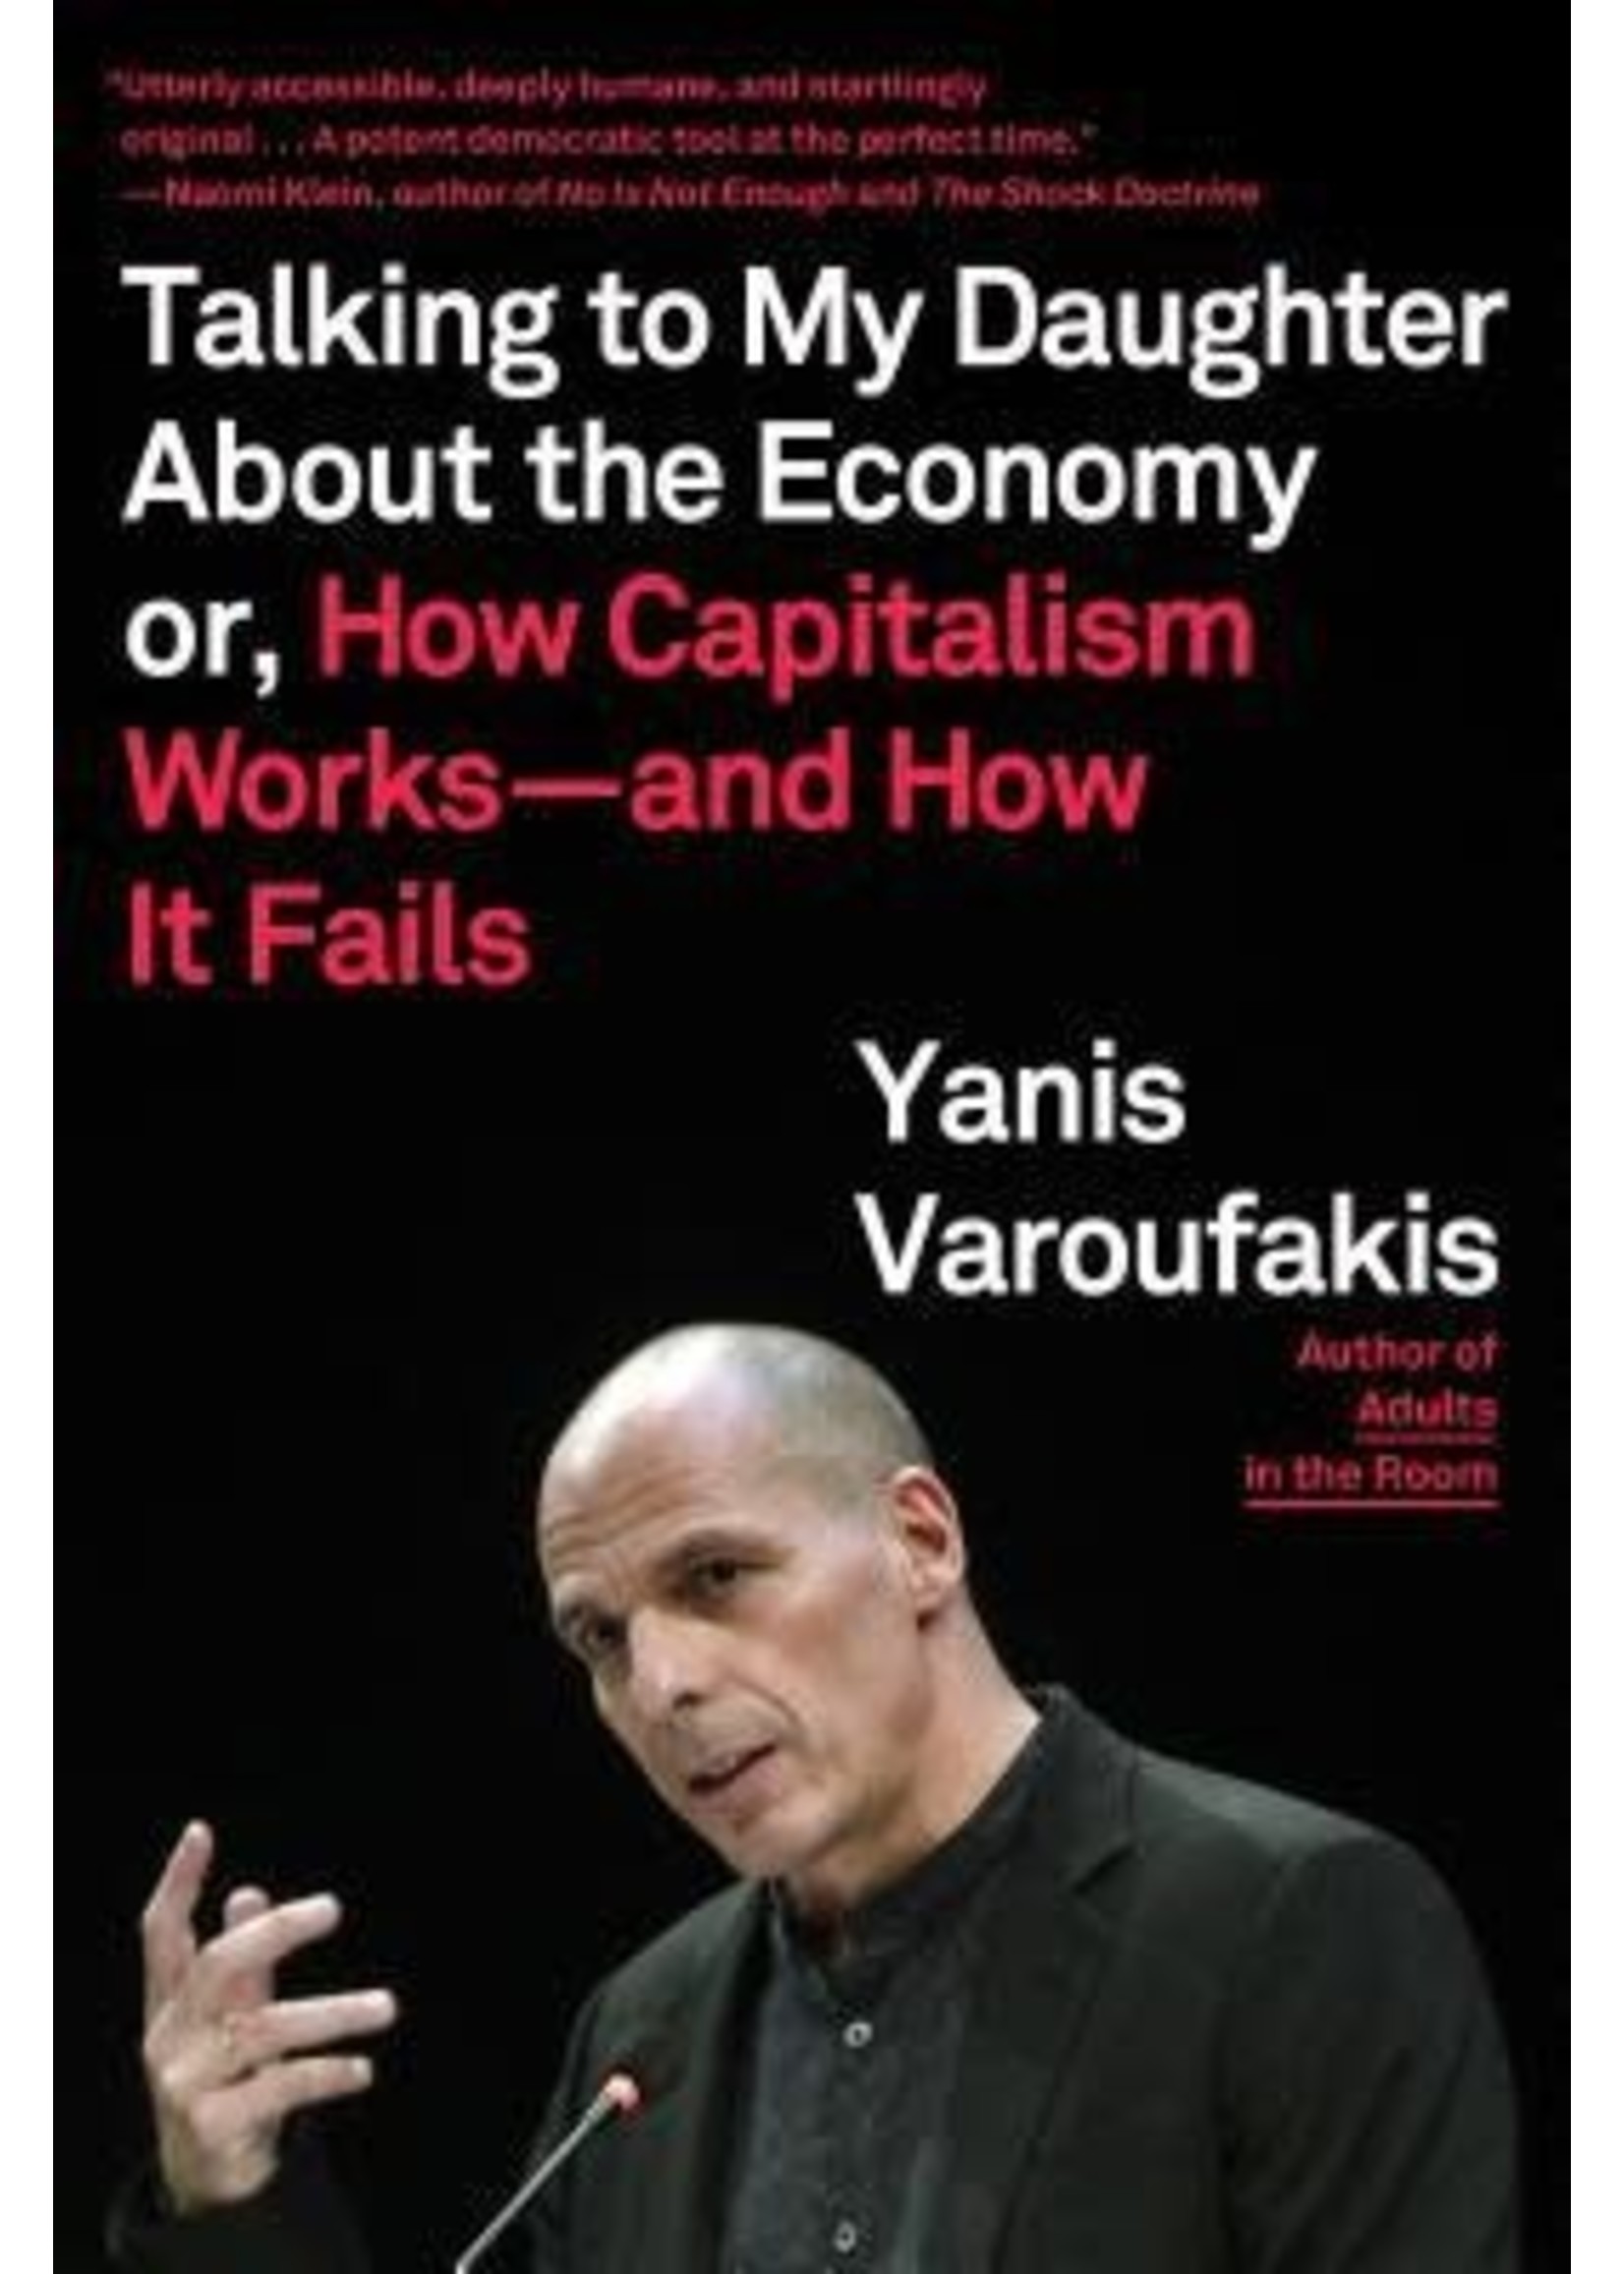 Talking to My Daughter about the Economy: Or, How Capitalism Works--And How It Fails by Yanis Varoufakis